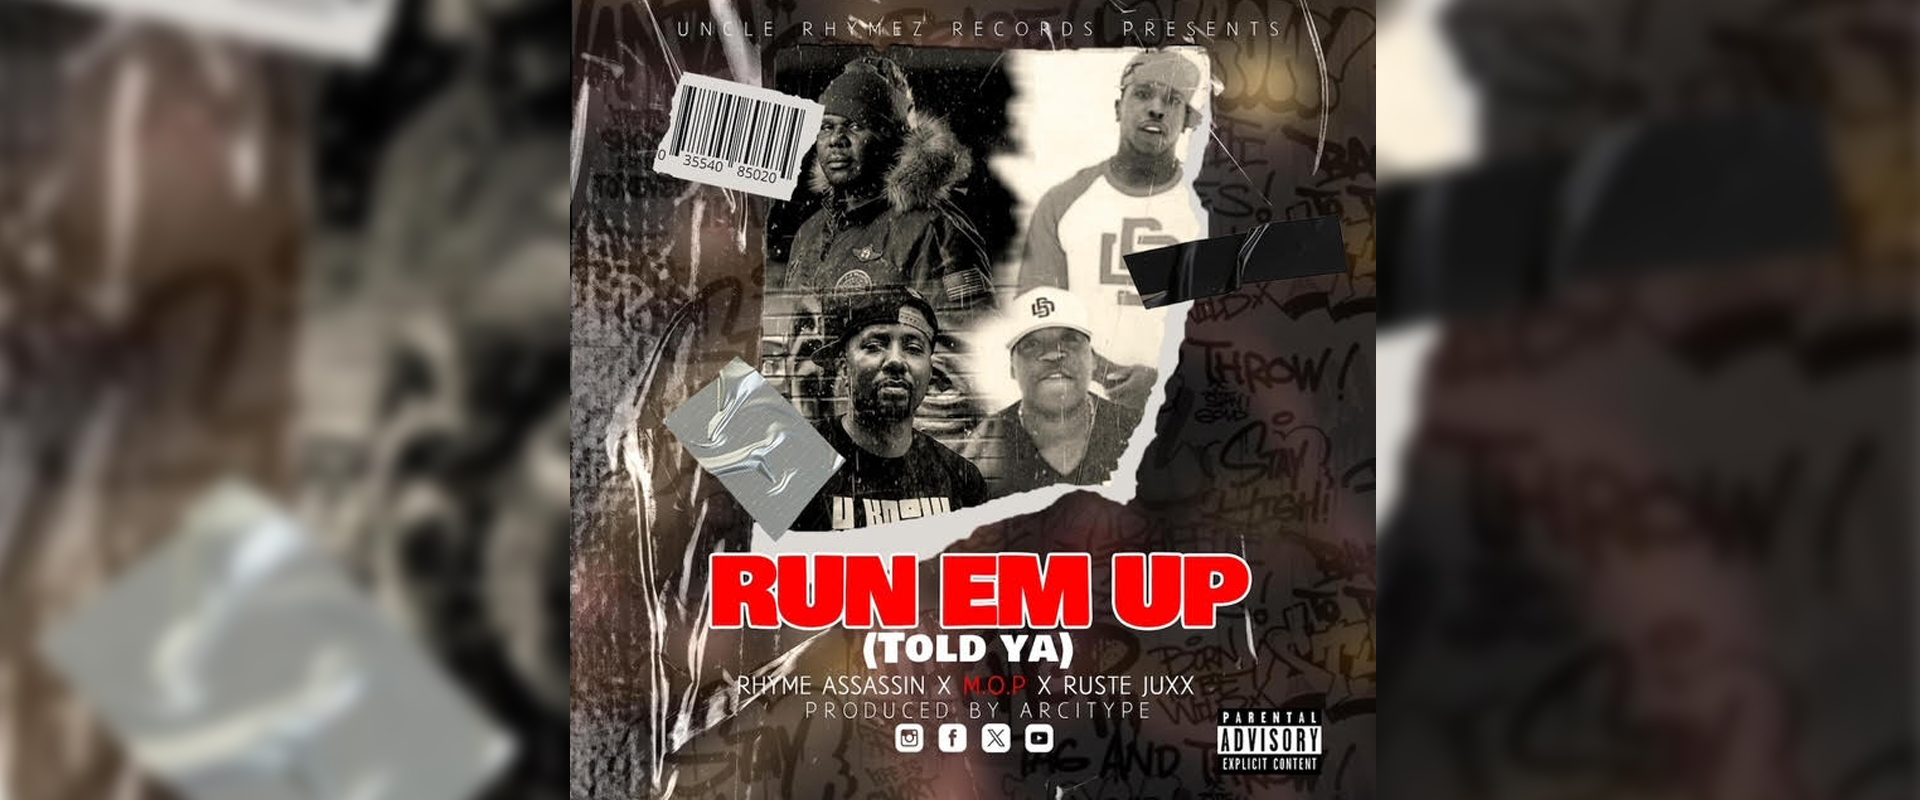 M.O.P. & Ruste Juxx Join Rhyme Assassin for His New Single, 'Run 